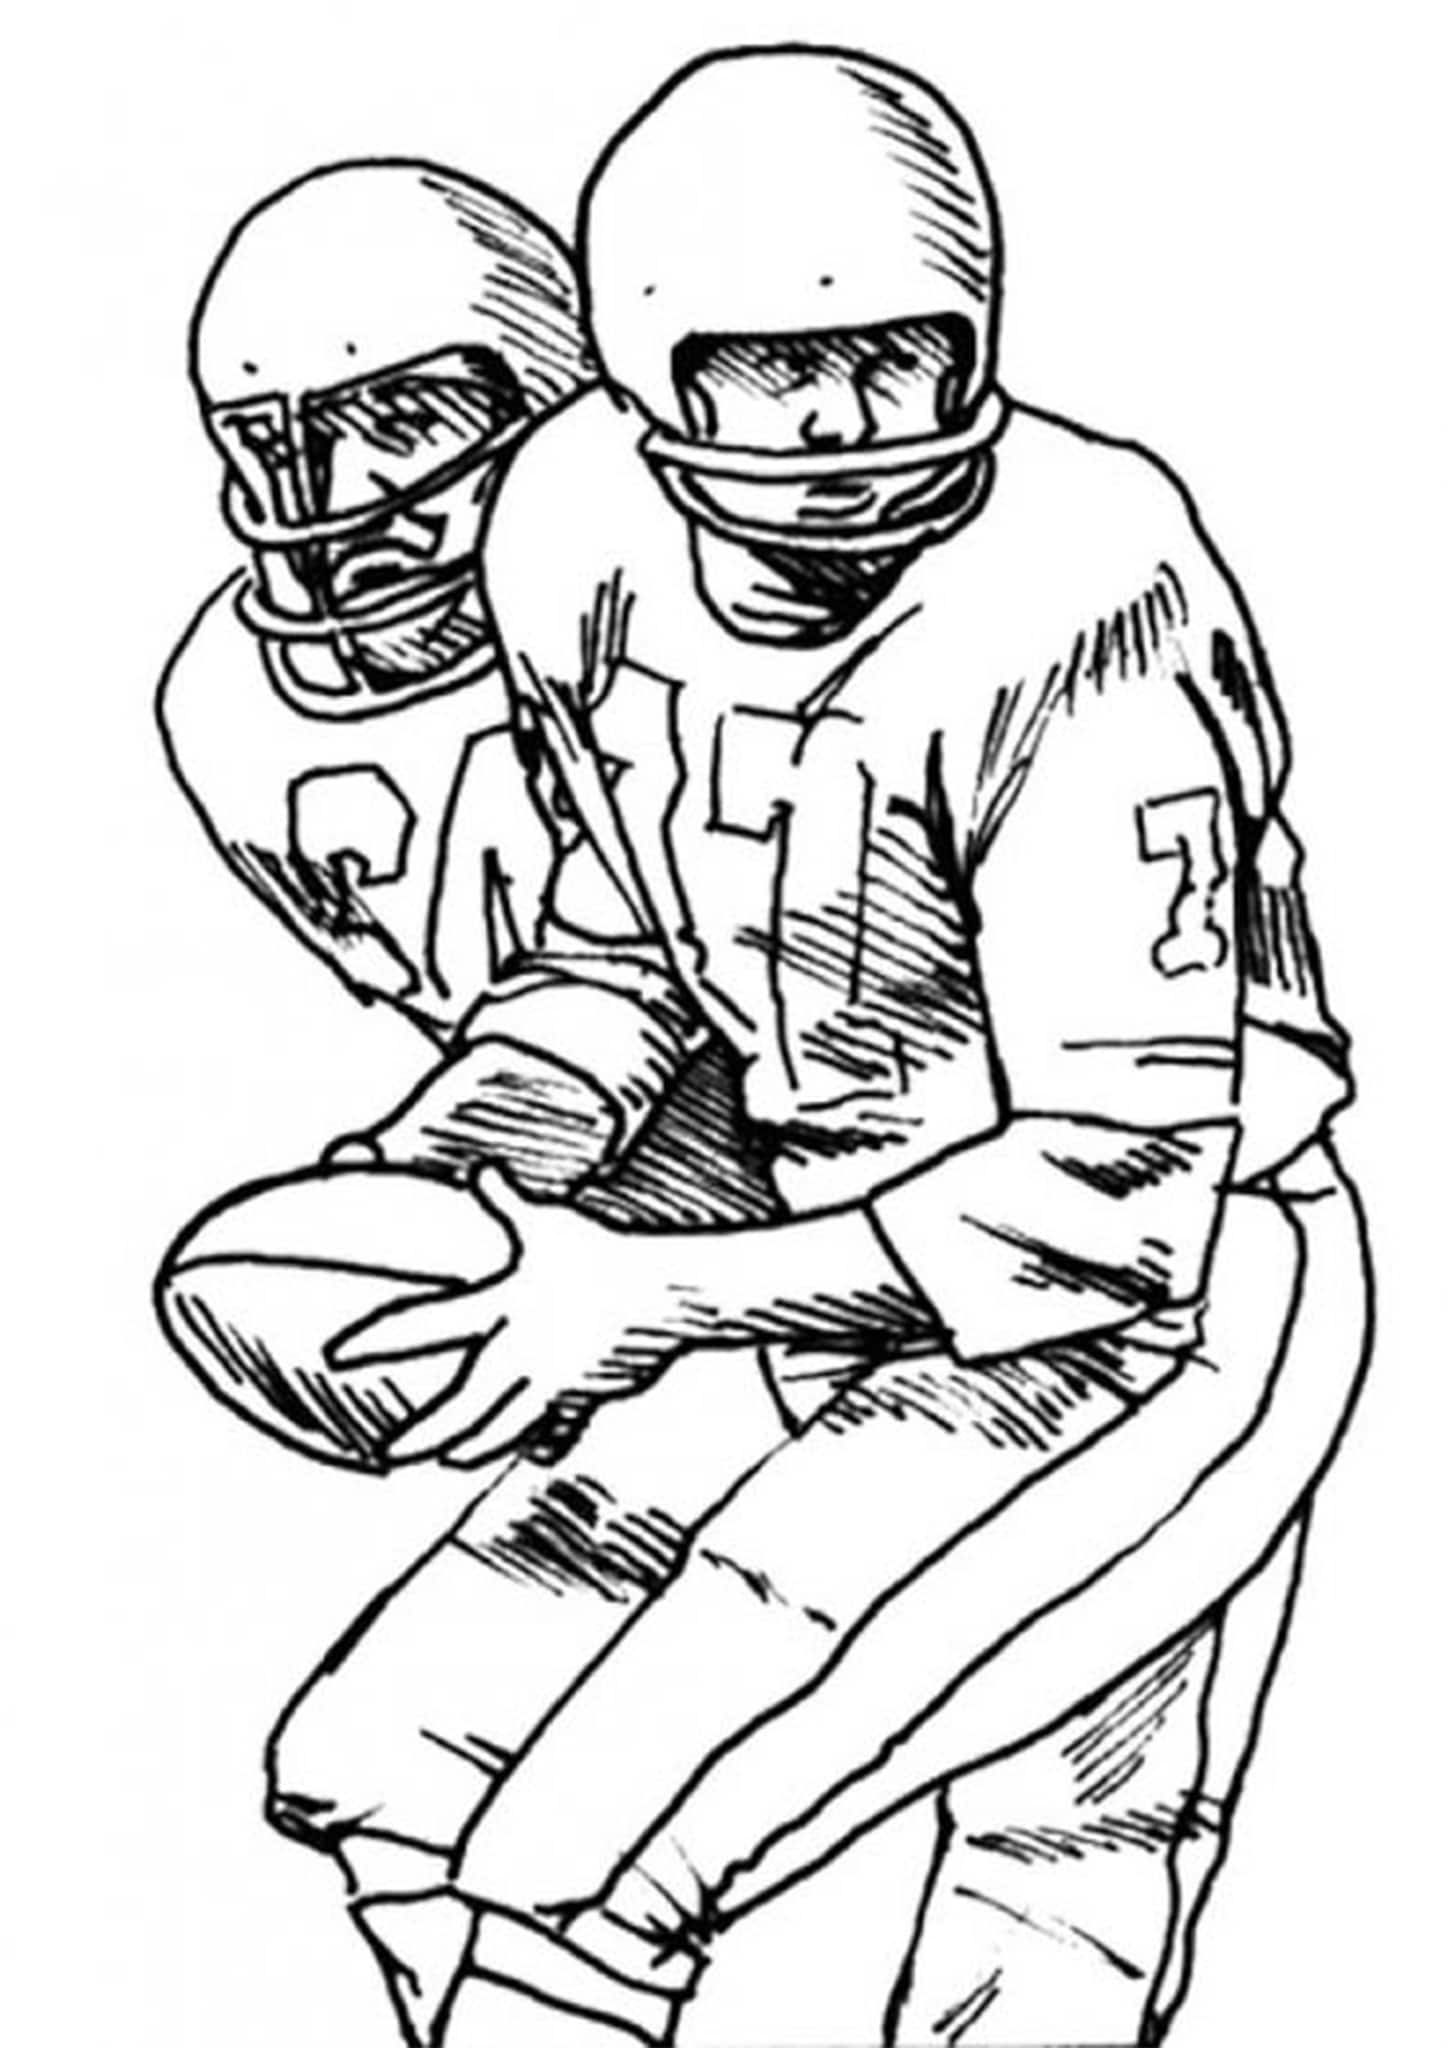 Free easy to print football coloring pages football coloring pages sports coloring pages coloring pages to print